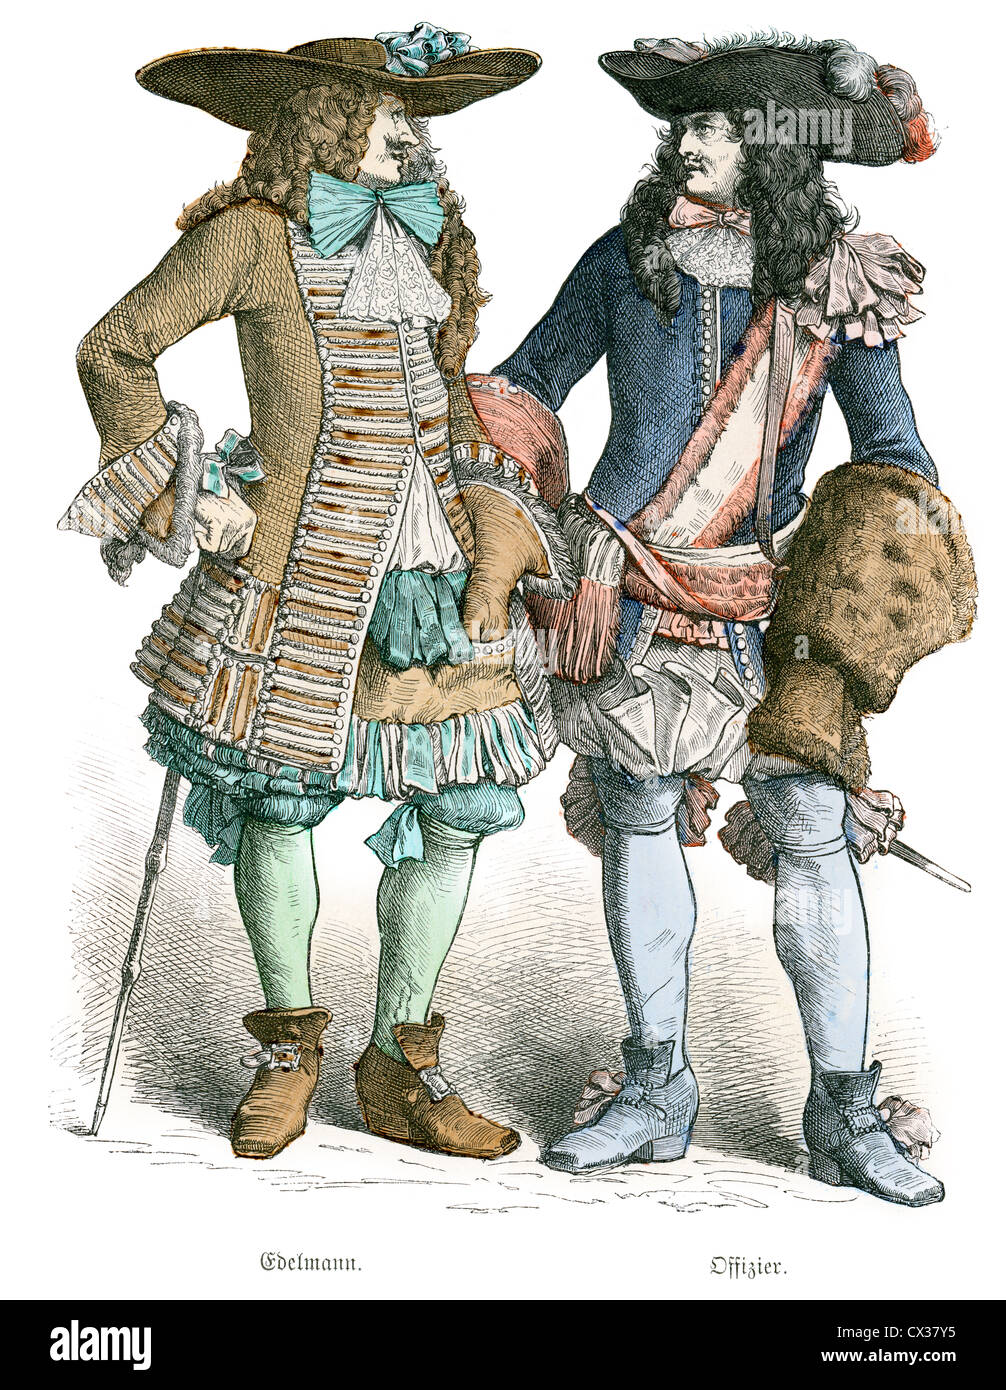 French Officer and Nobleman from the late 17th Century Stock Photo